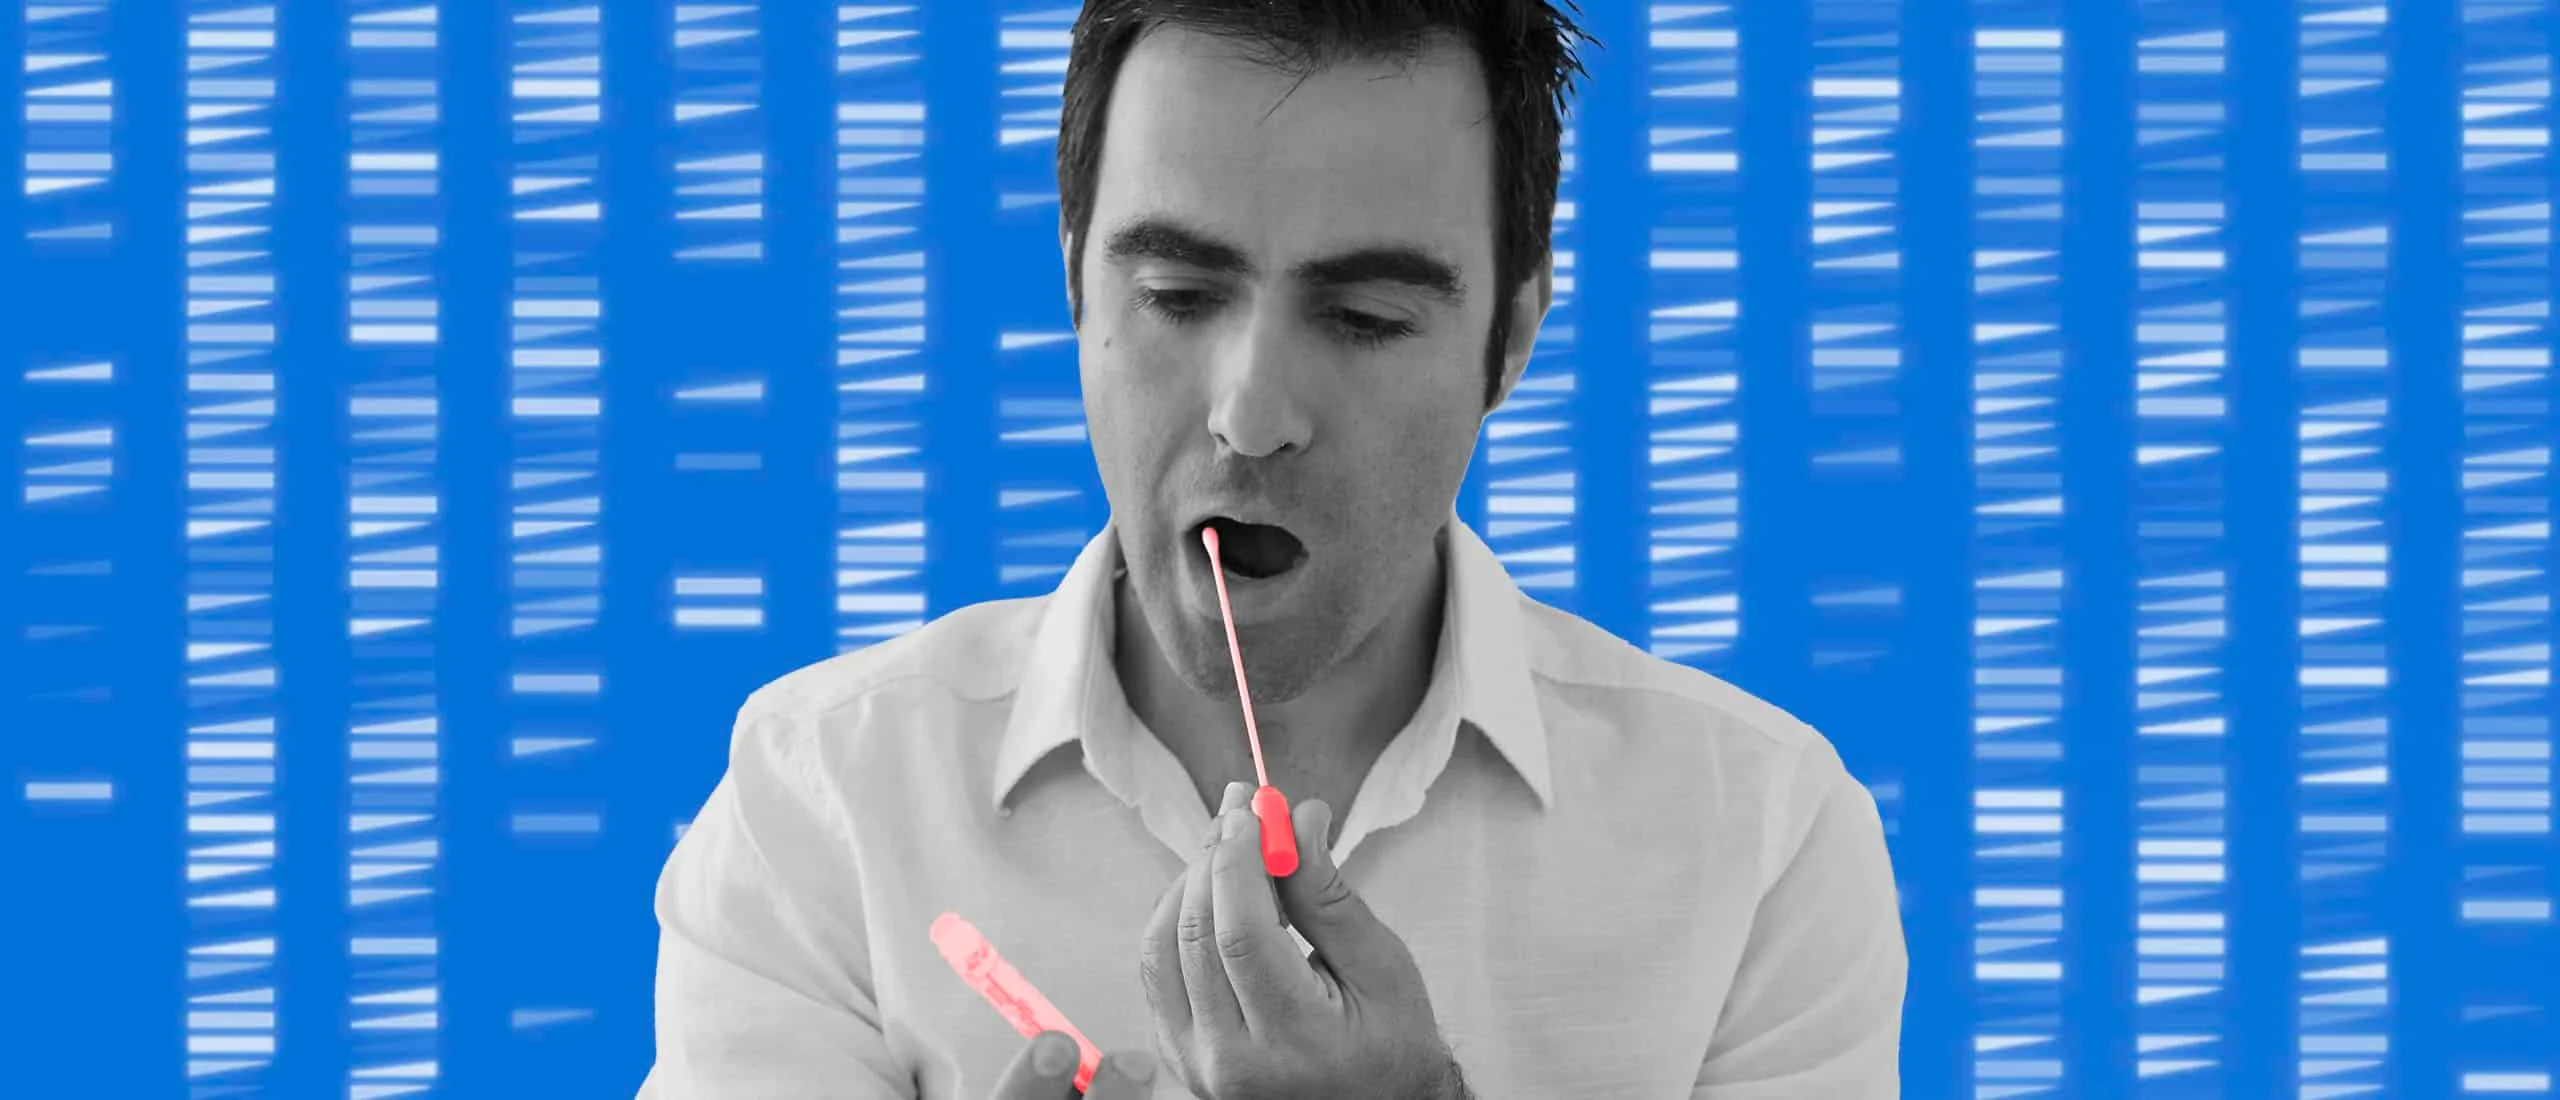 A man swabs his cheek with a genetic test kit